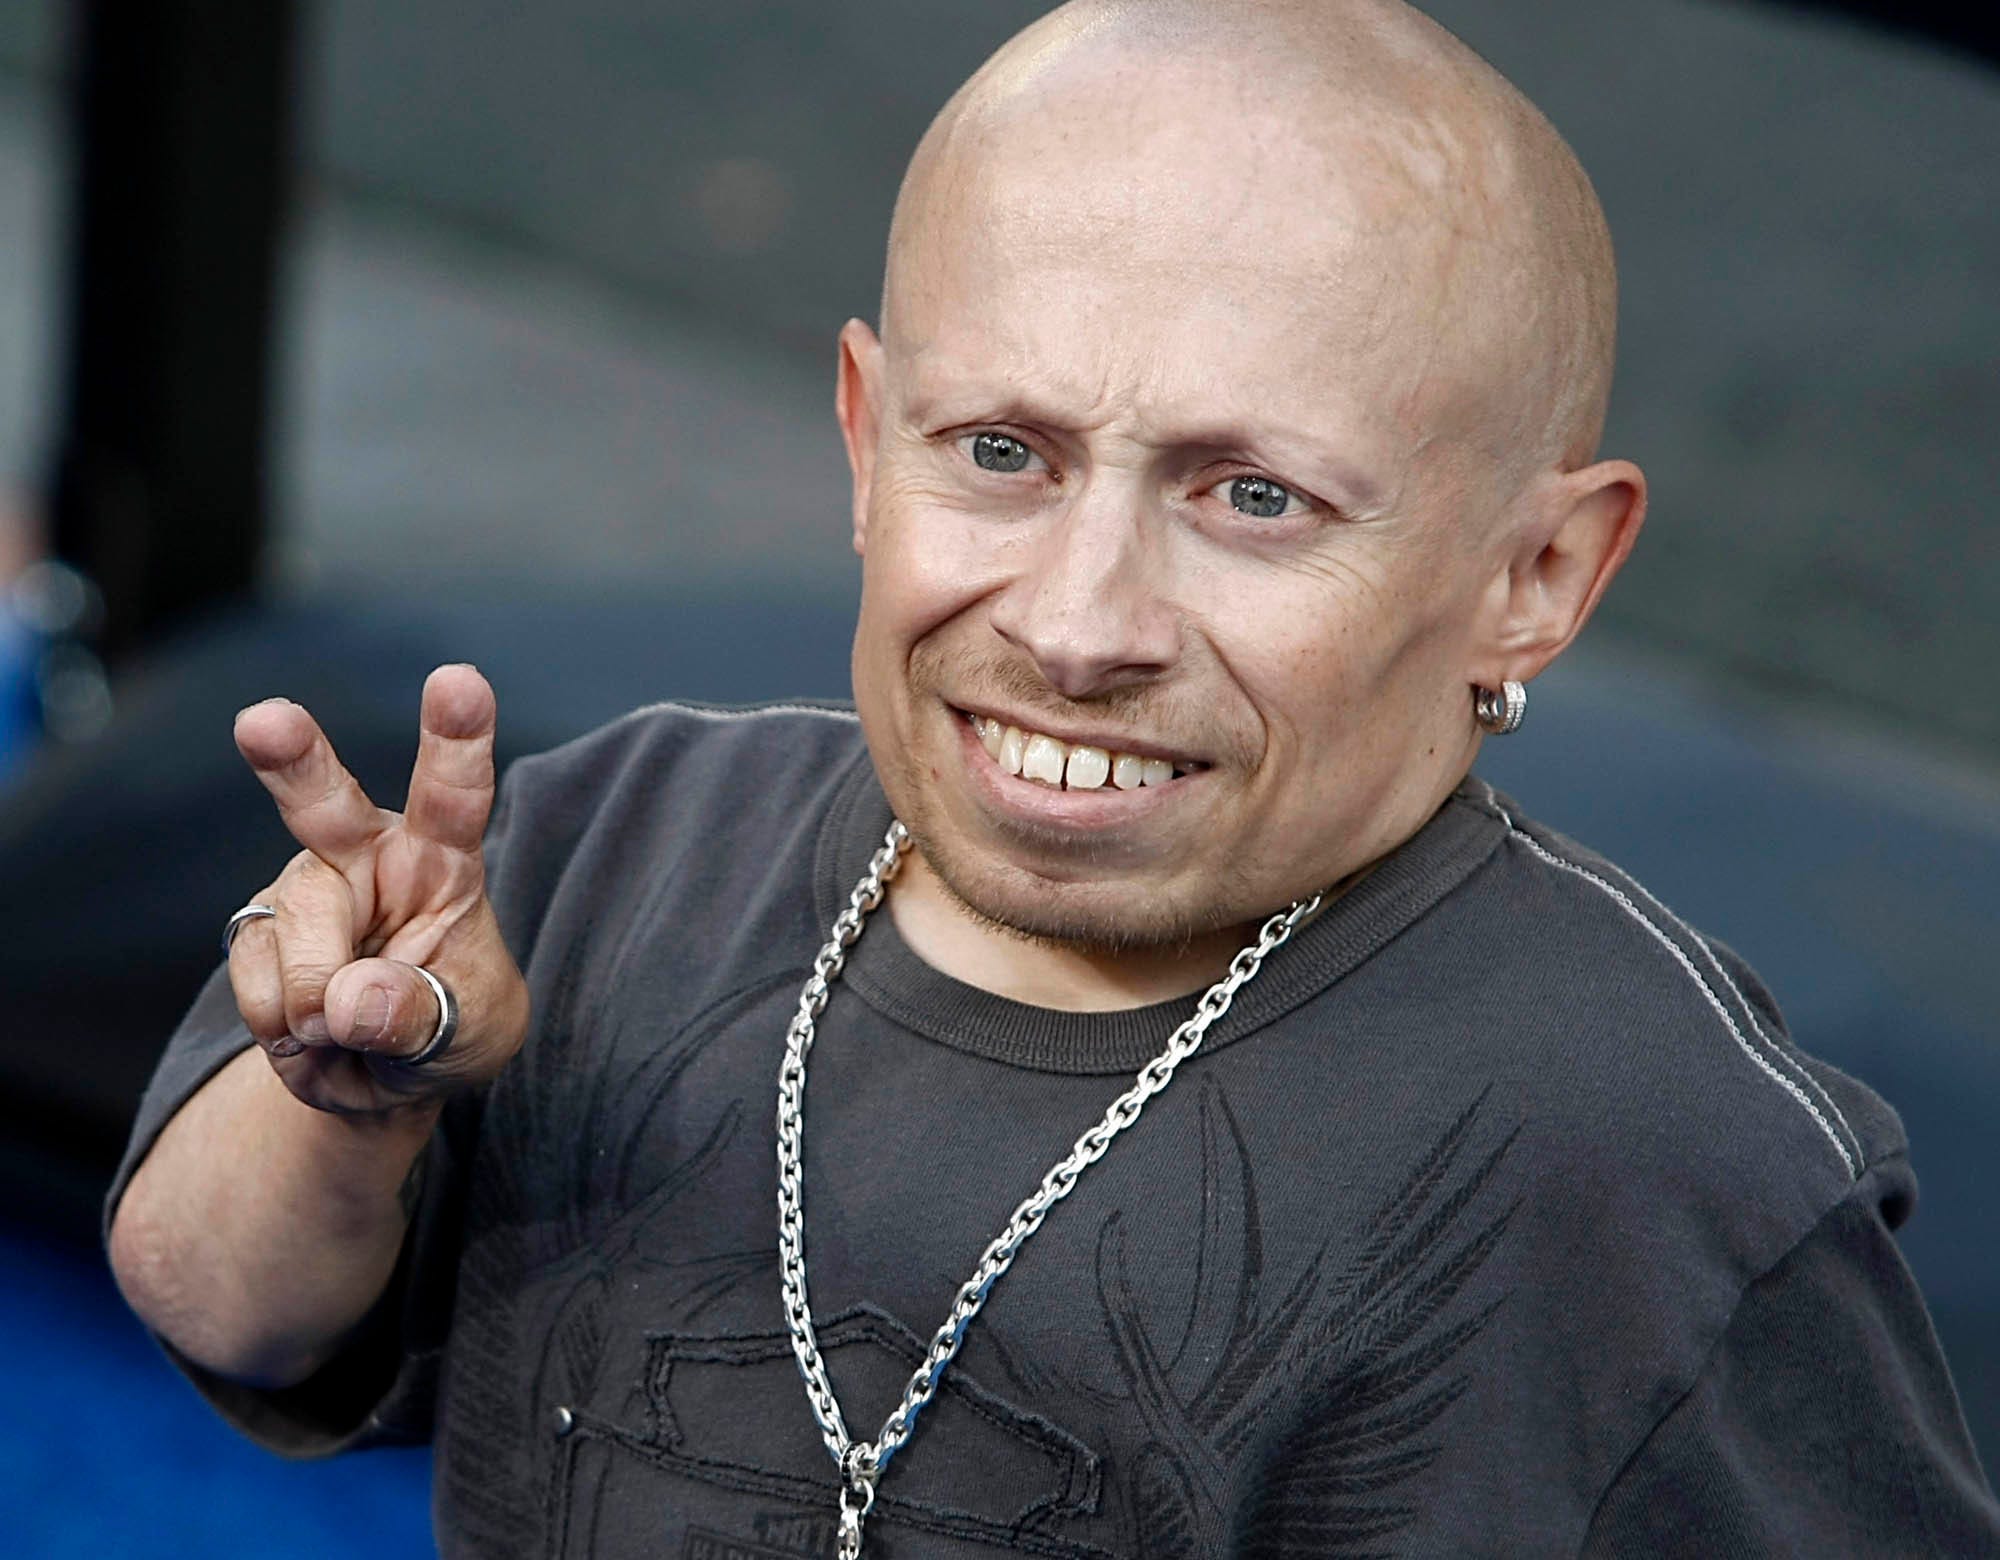 Mike Myers, other stars react to Verne Troyer's death squib.